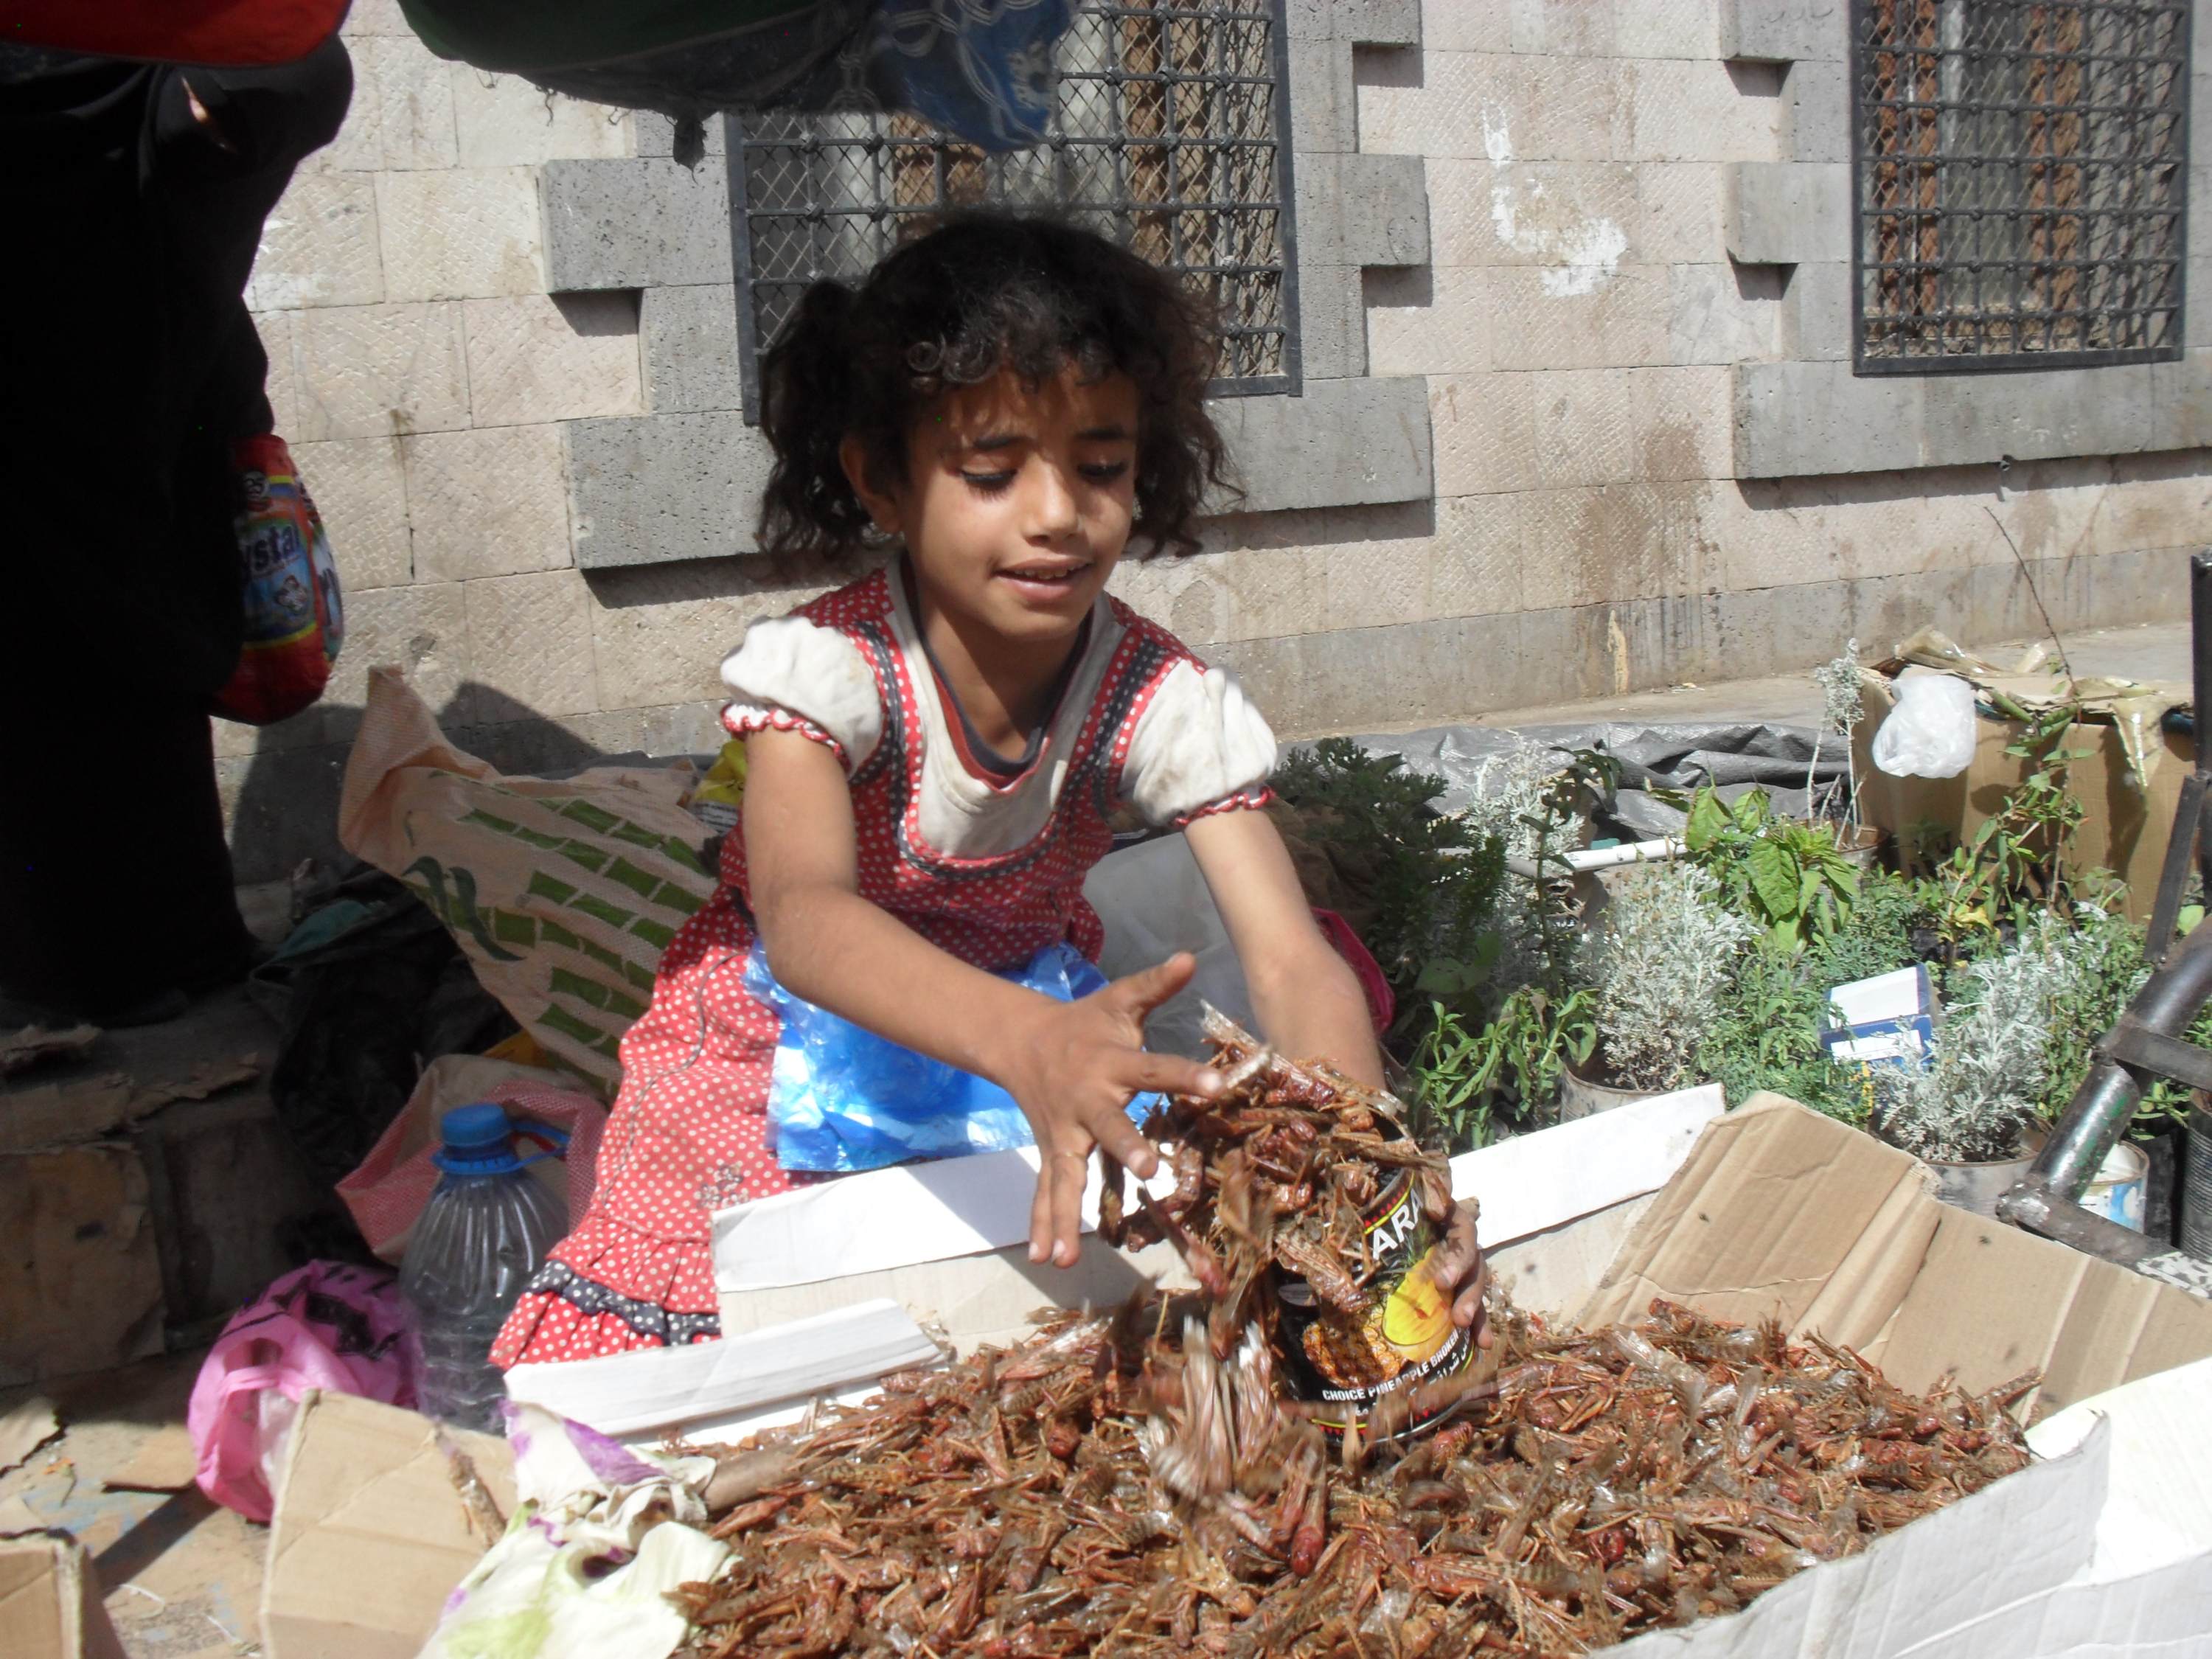 Young Jihad scoops up locusts she sells in the old city of Sanaa (MEE/Naseh Shaker)